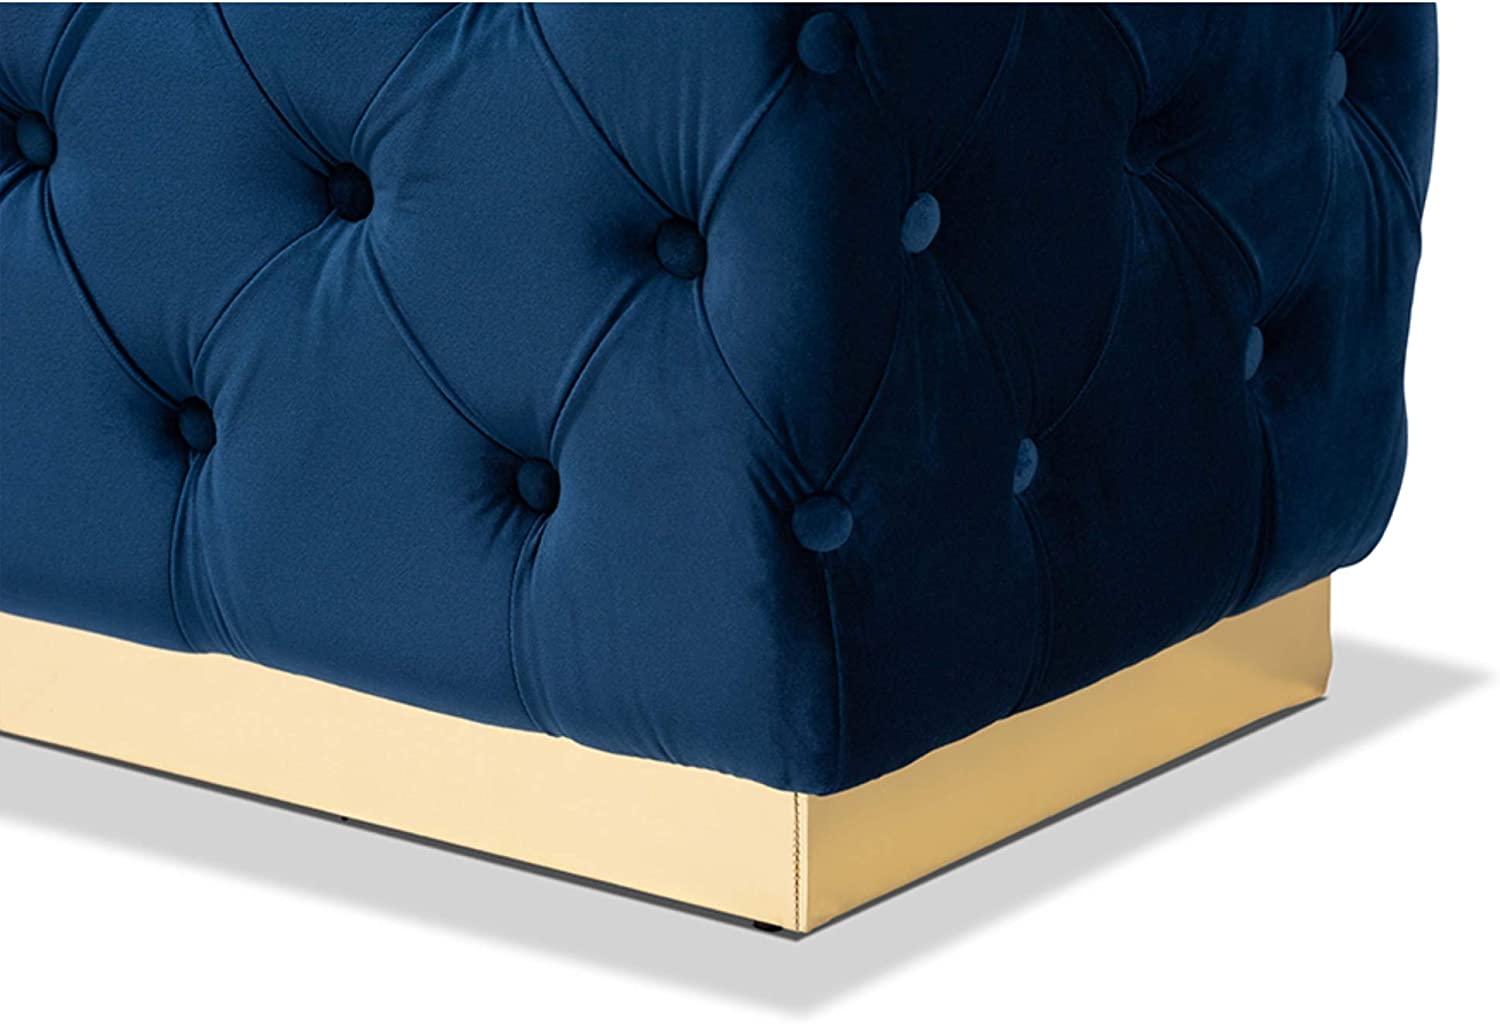 Baxton Studio Corrine Glam and Luxe Navy Blue Velvet Fabric Upholstered and Gold PU Leather Ottoman